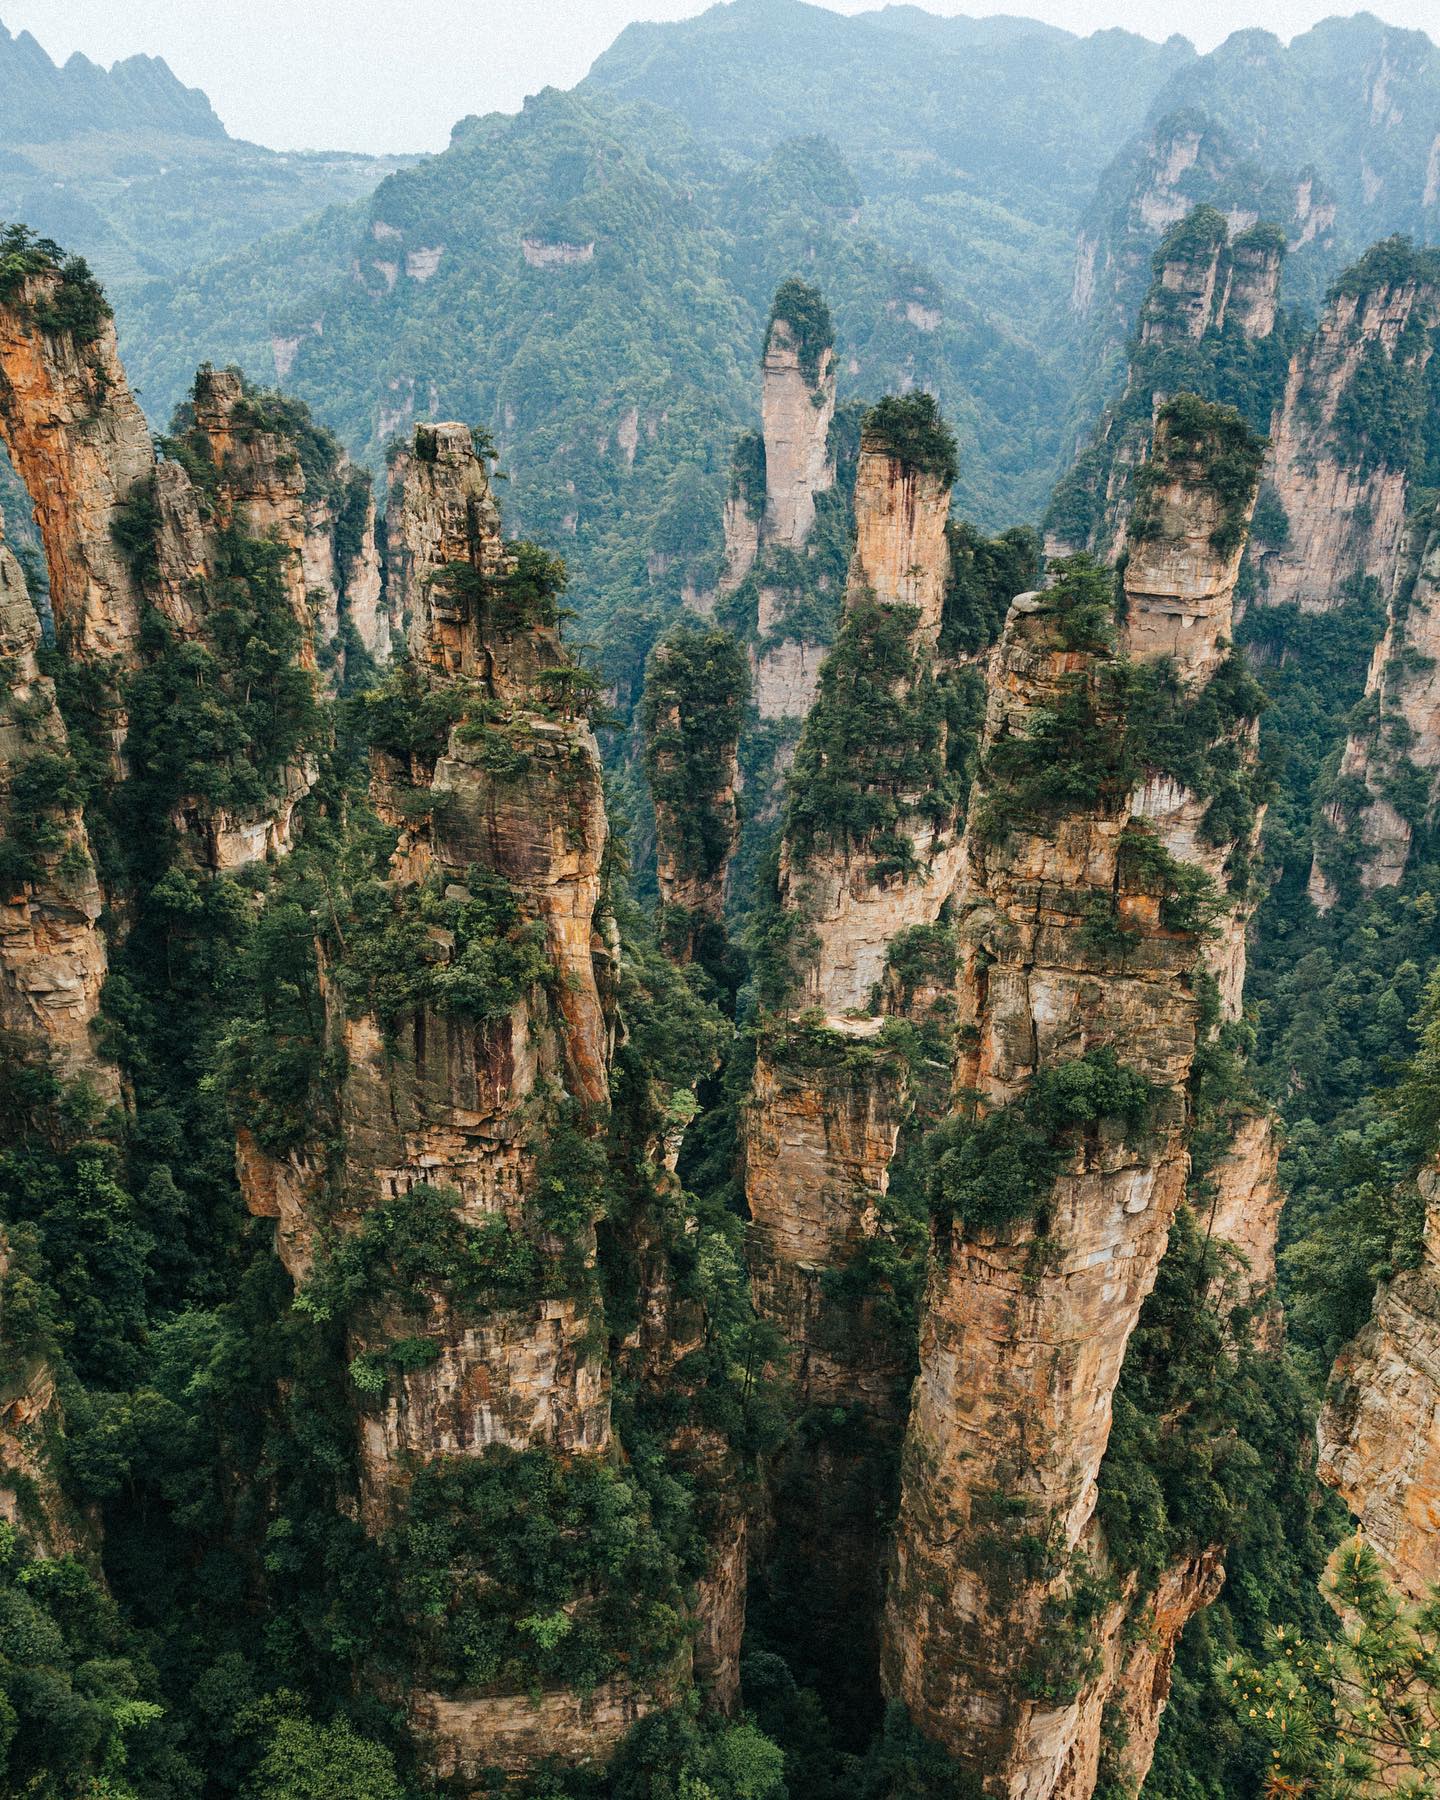 The most epic views I’ve seen are surely at Zhangjiajie National Forest Park in Hunan, China.  You can literally see vistas like this for 3 days straight.